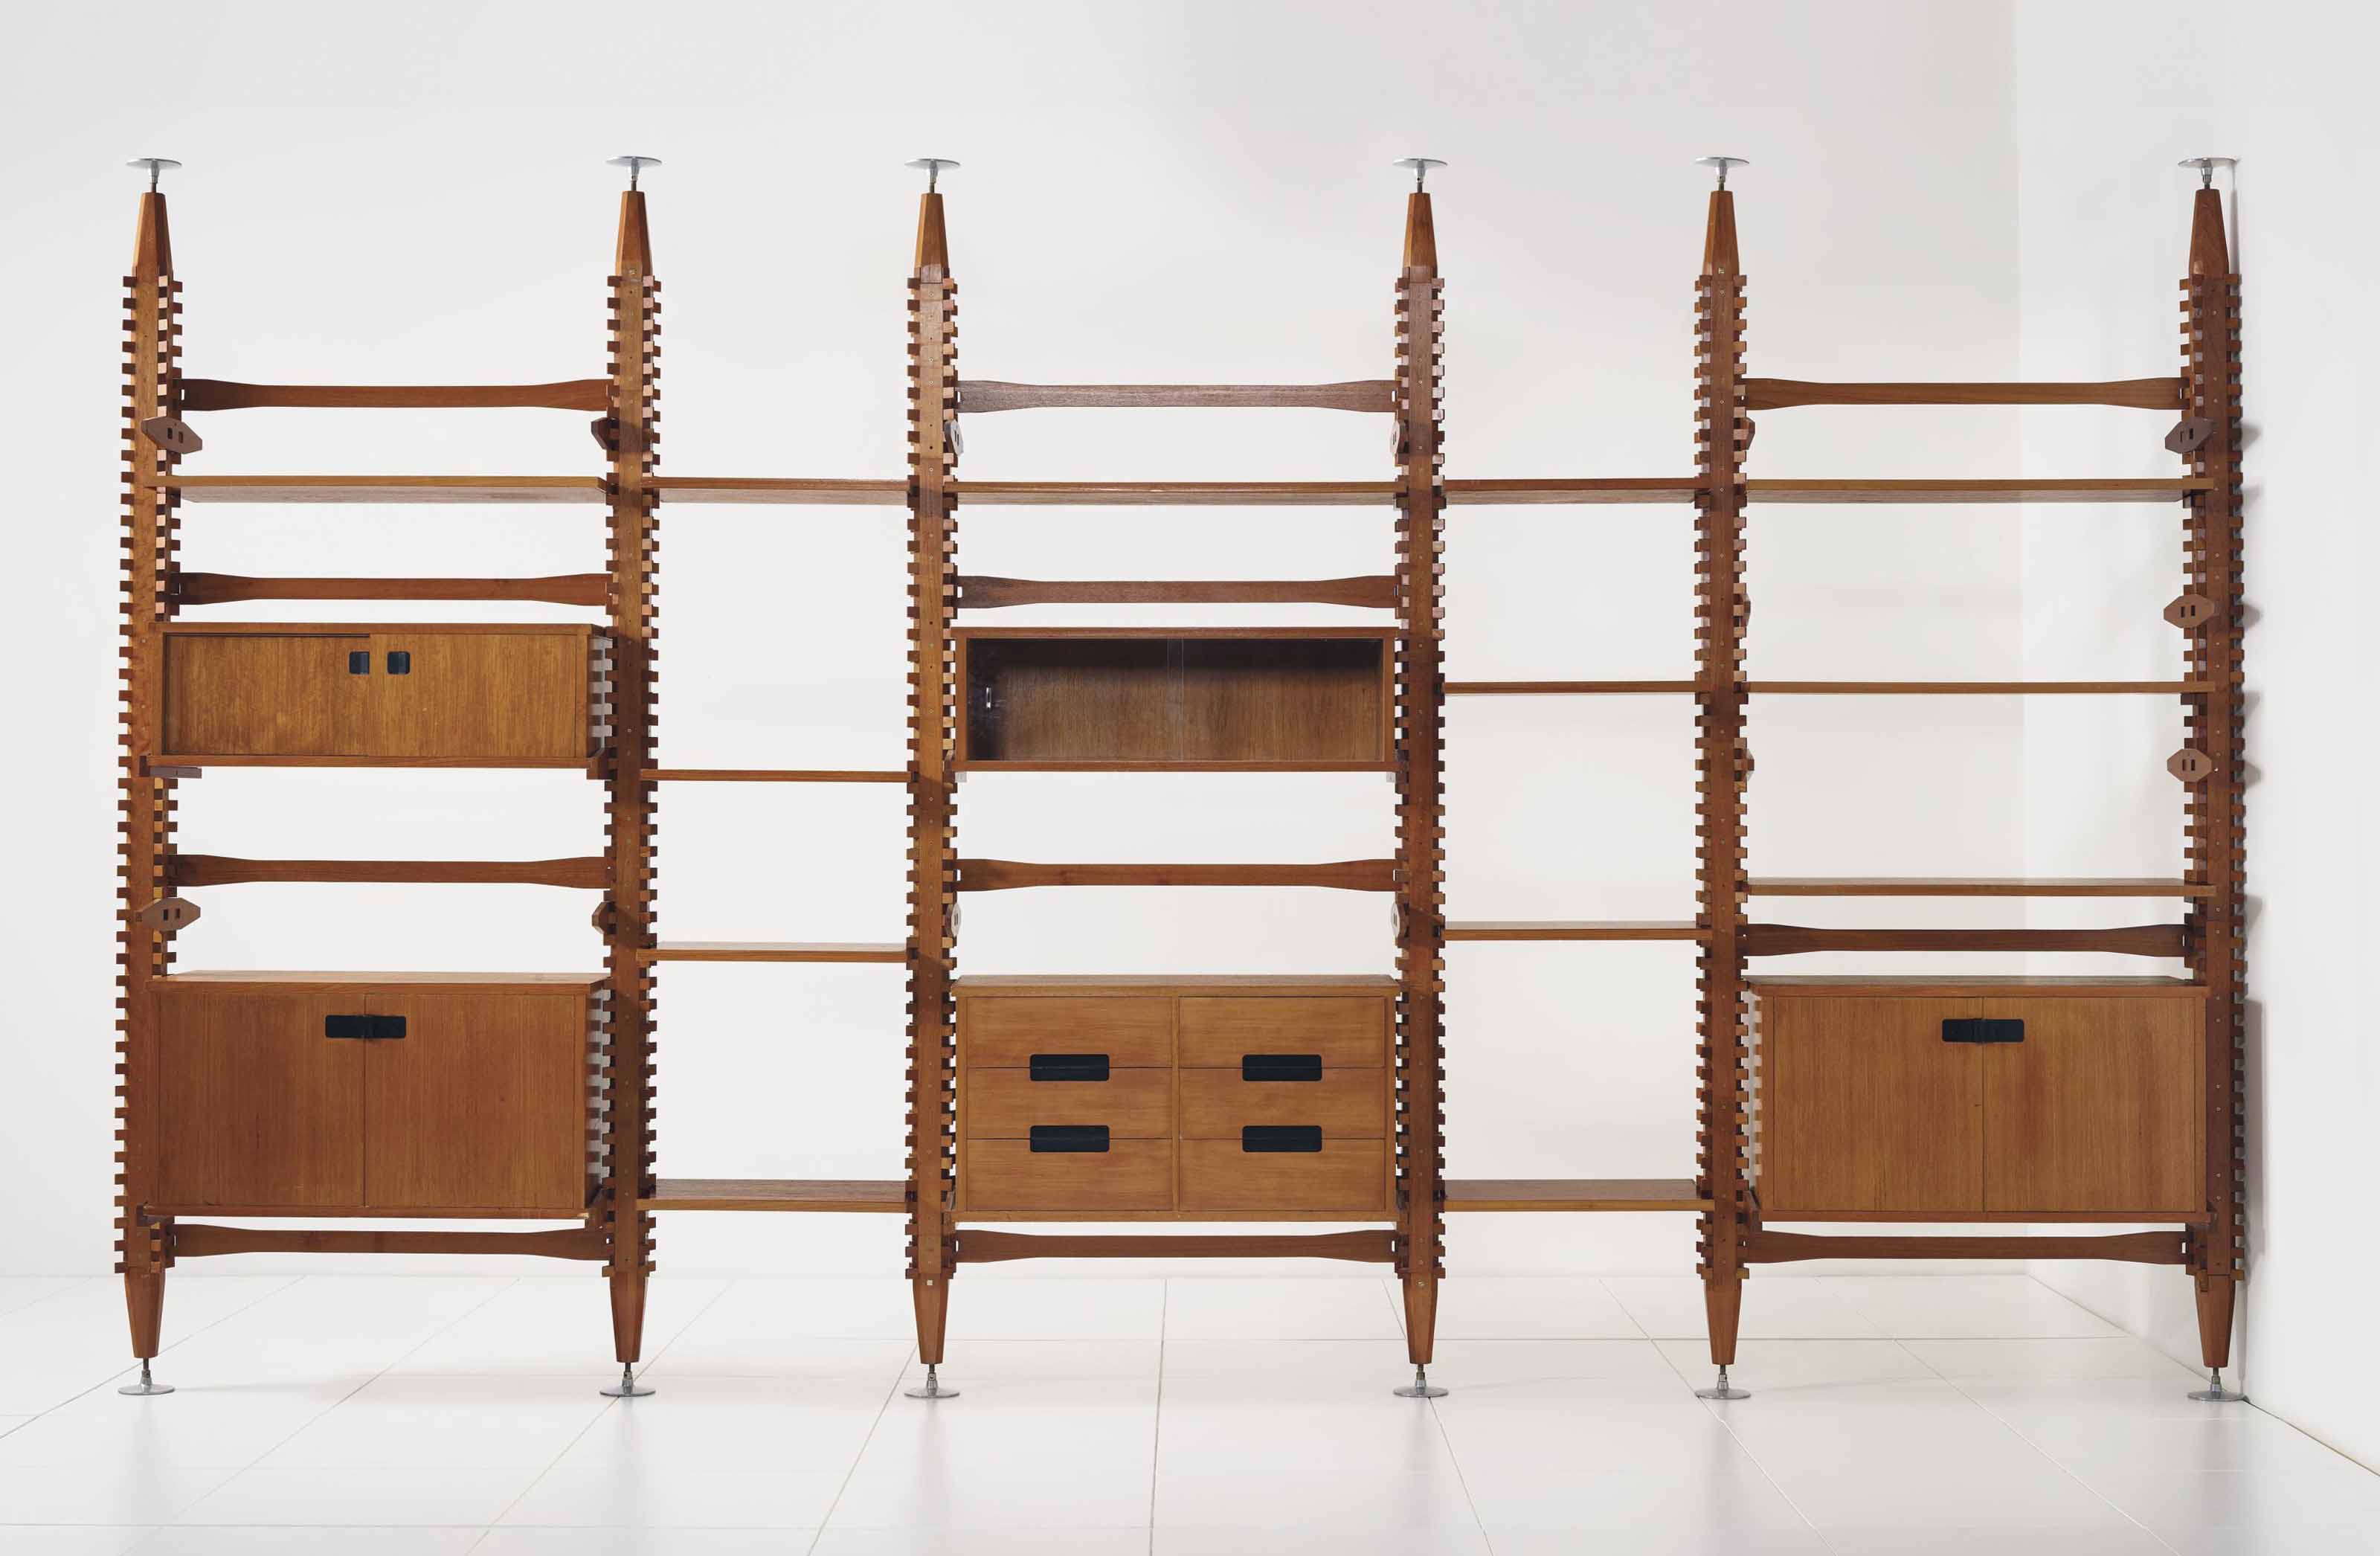 ICO PARISI (1916-1996) | A SECTIONAL STORAGE SYSTEM, DESIGNED 1956 ...